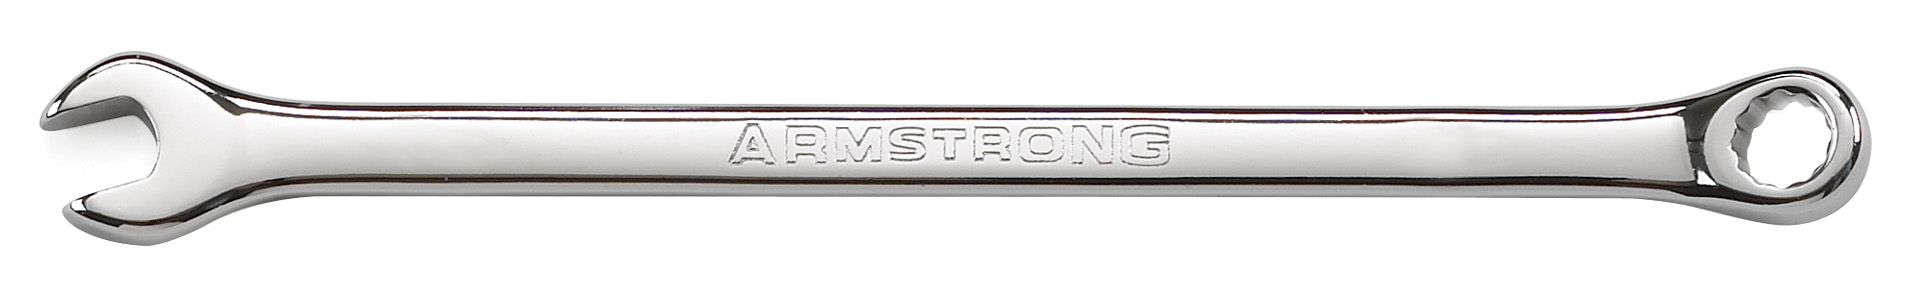 Armstrong 14 mm 12 pt. Full Polish Long Combination Wrench